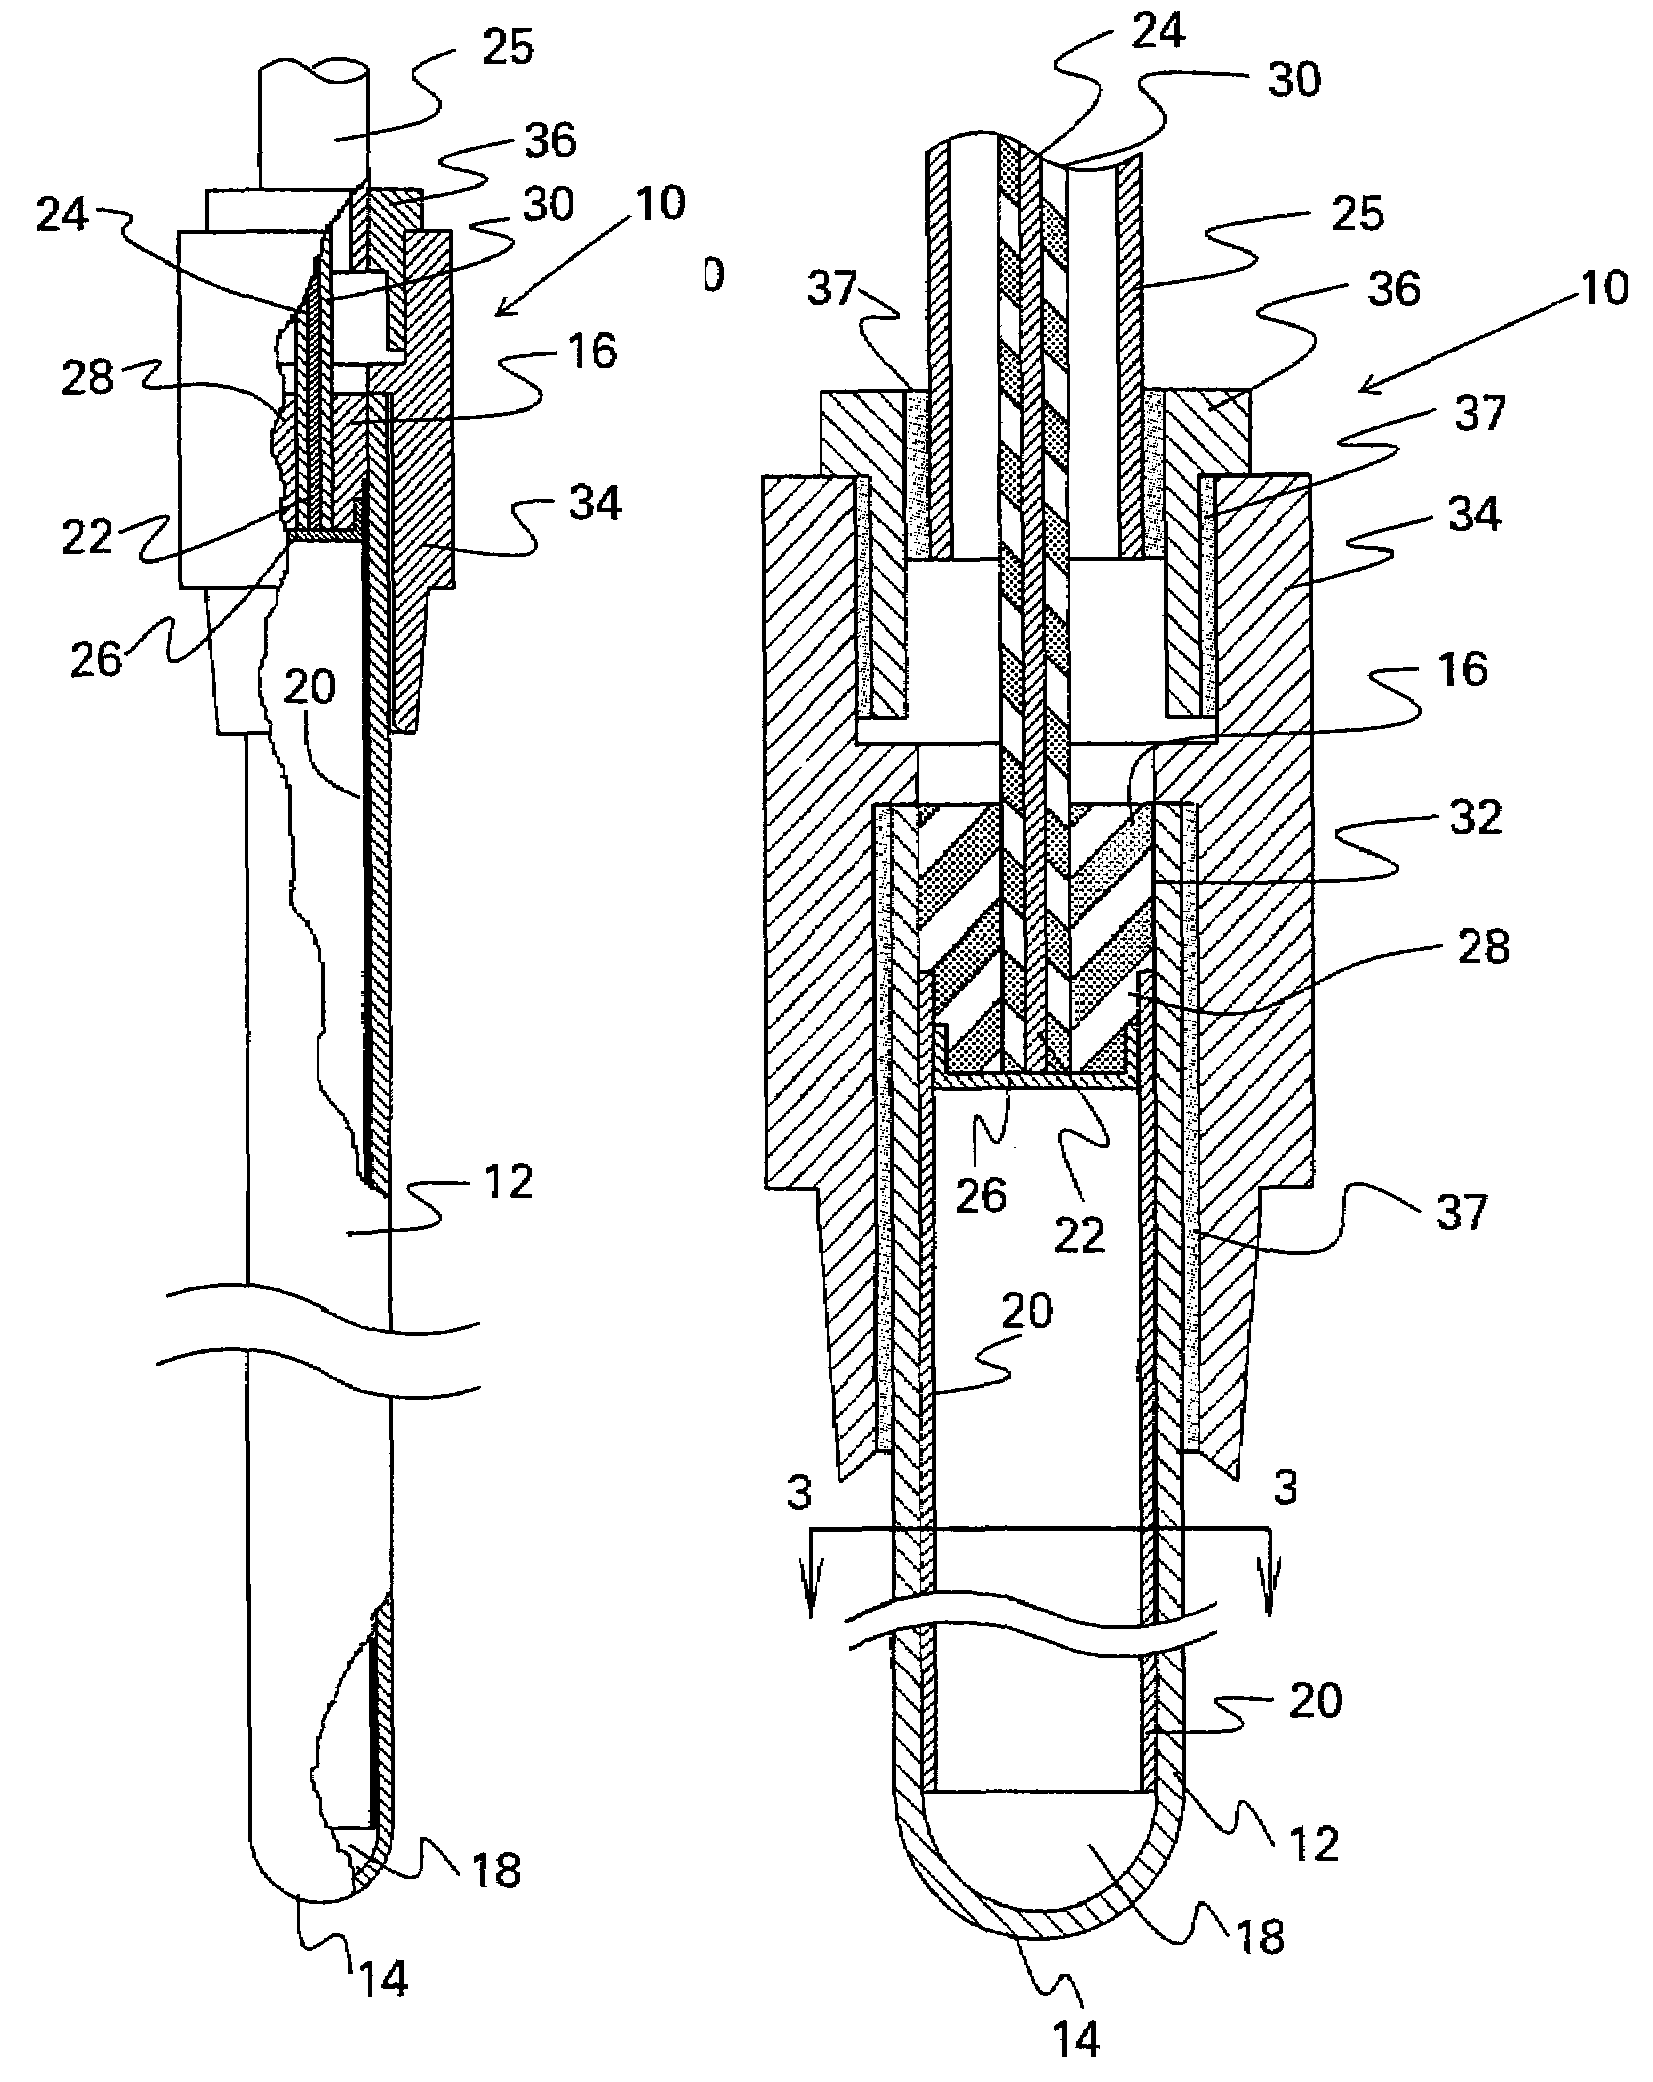 Capacitive electrostatic process for inhibiting the formation of biofilm deposits in membrane-separation systems